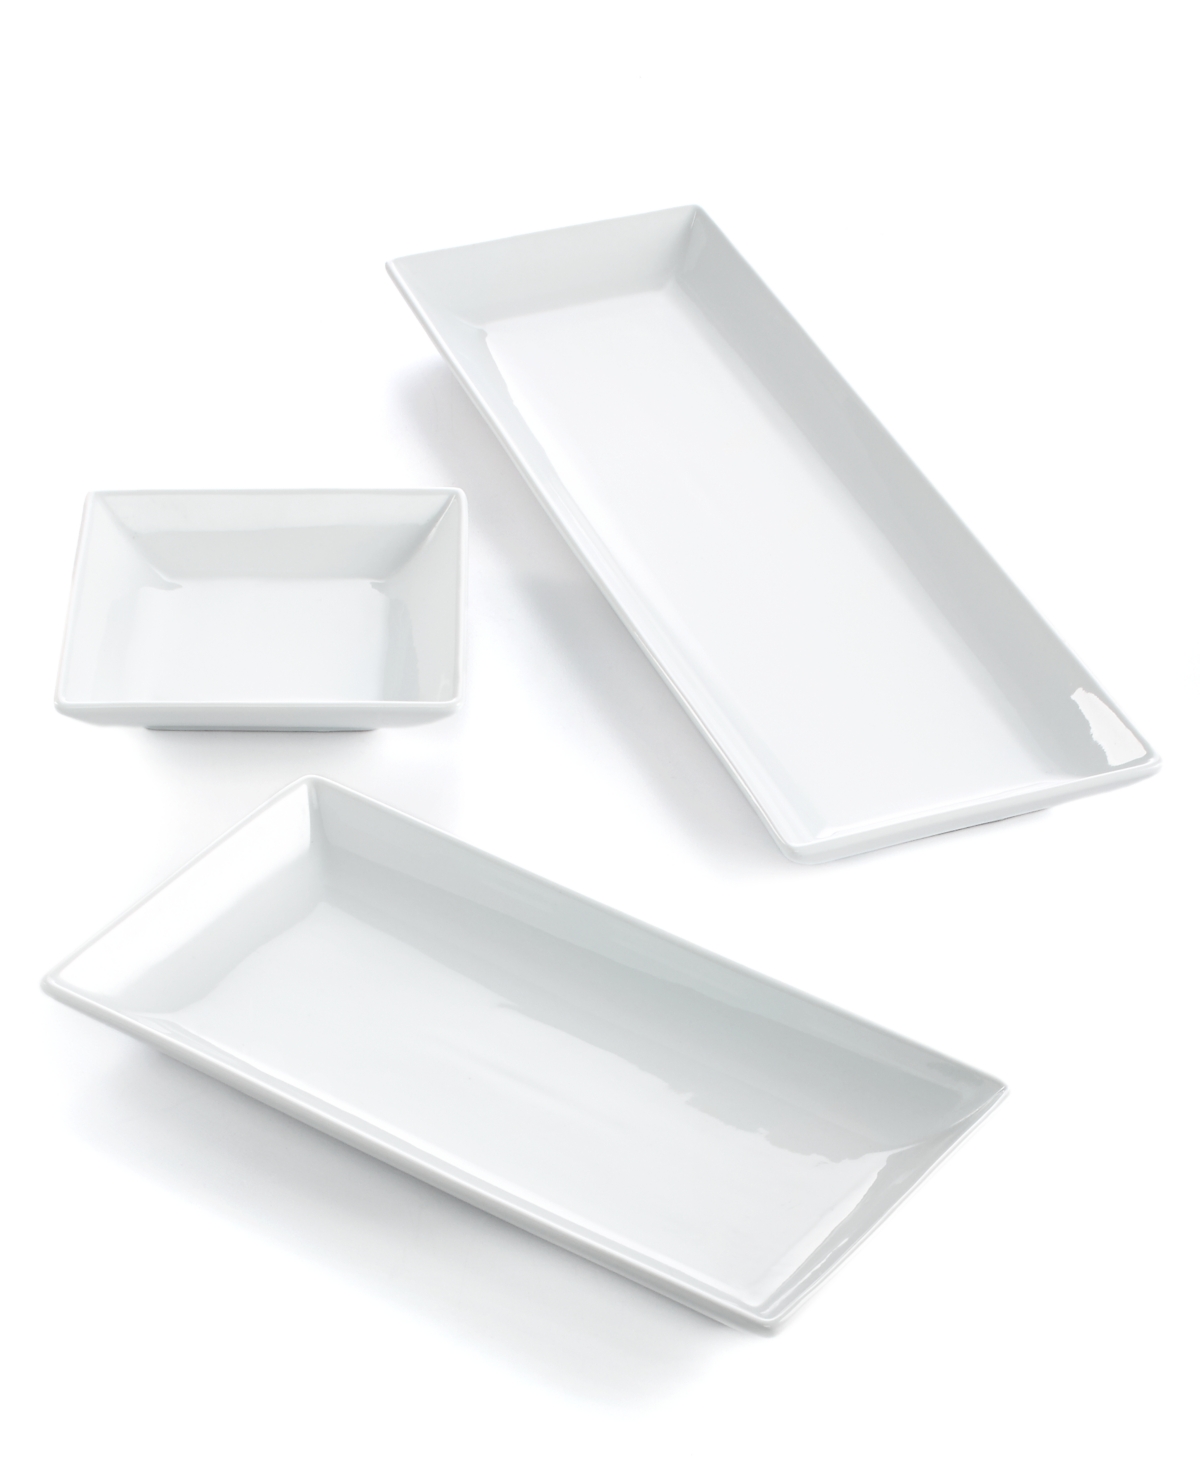 Whiteware Nested Serving Trays, Set of 3, Created for Macy's - White